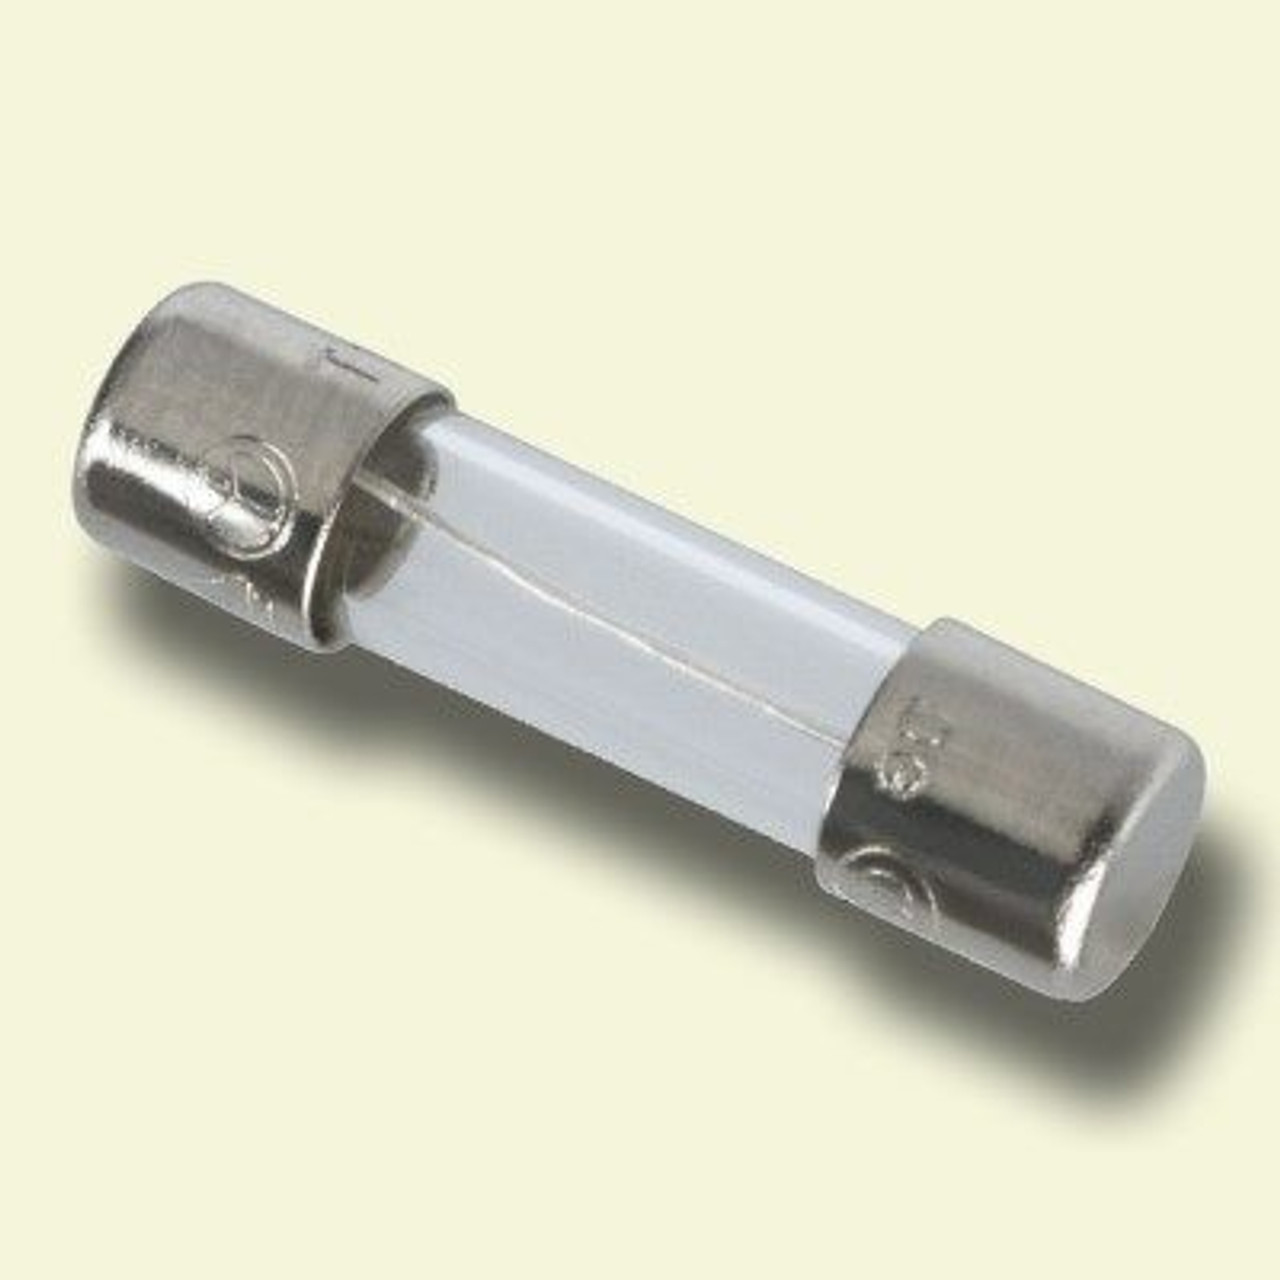 Replacement Fuses for Acoustic Image Instrument Amplifiers